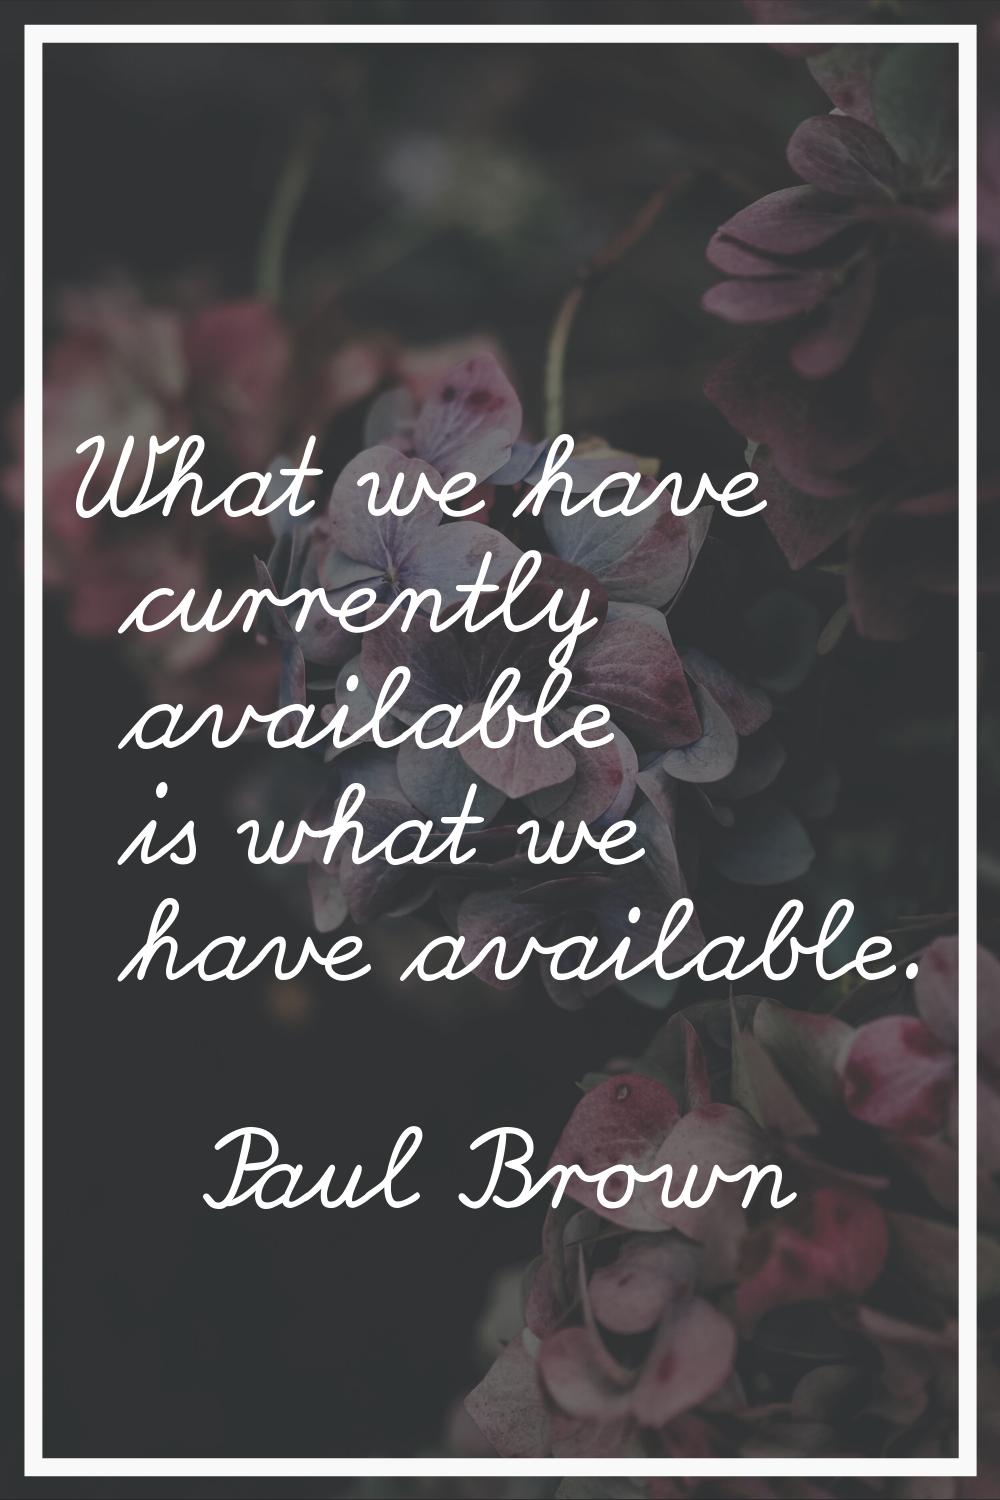 What we have currently available is what we have available.